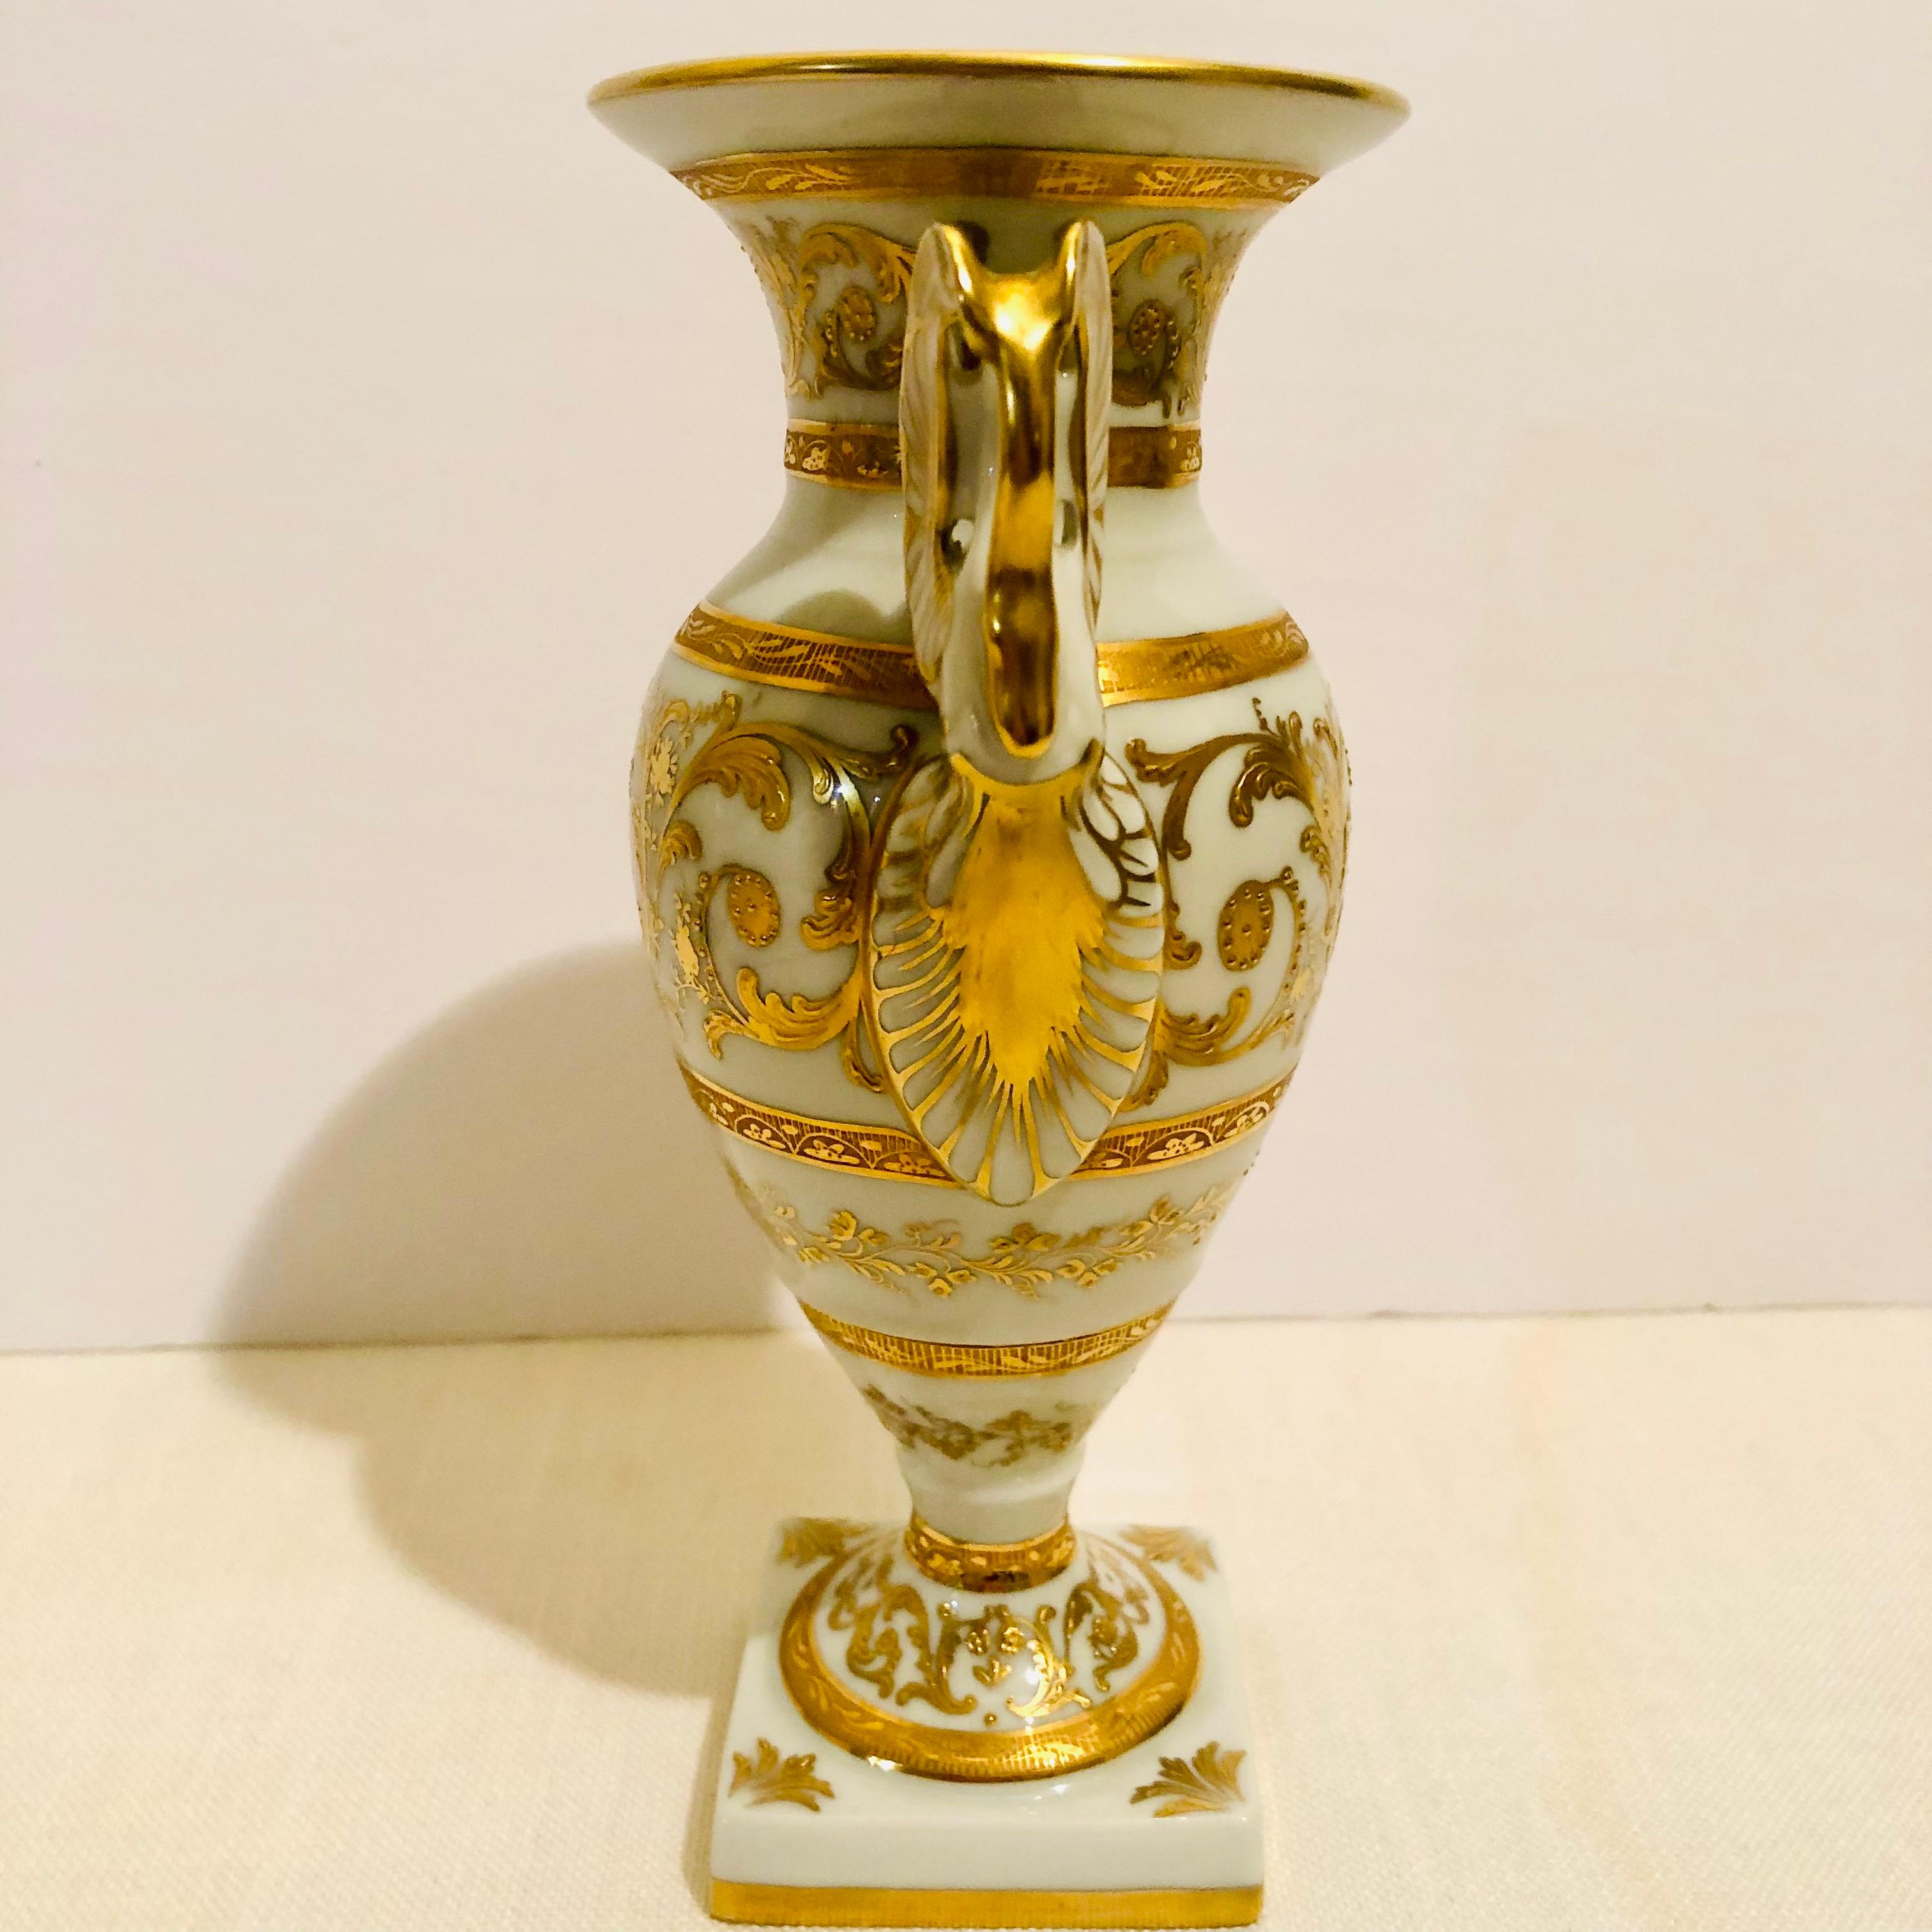 Gilt Le Tallec Neoclassical Vase With Elaborate Raised Gliding and Swan Handles